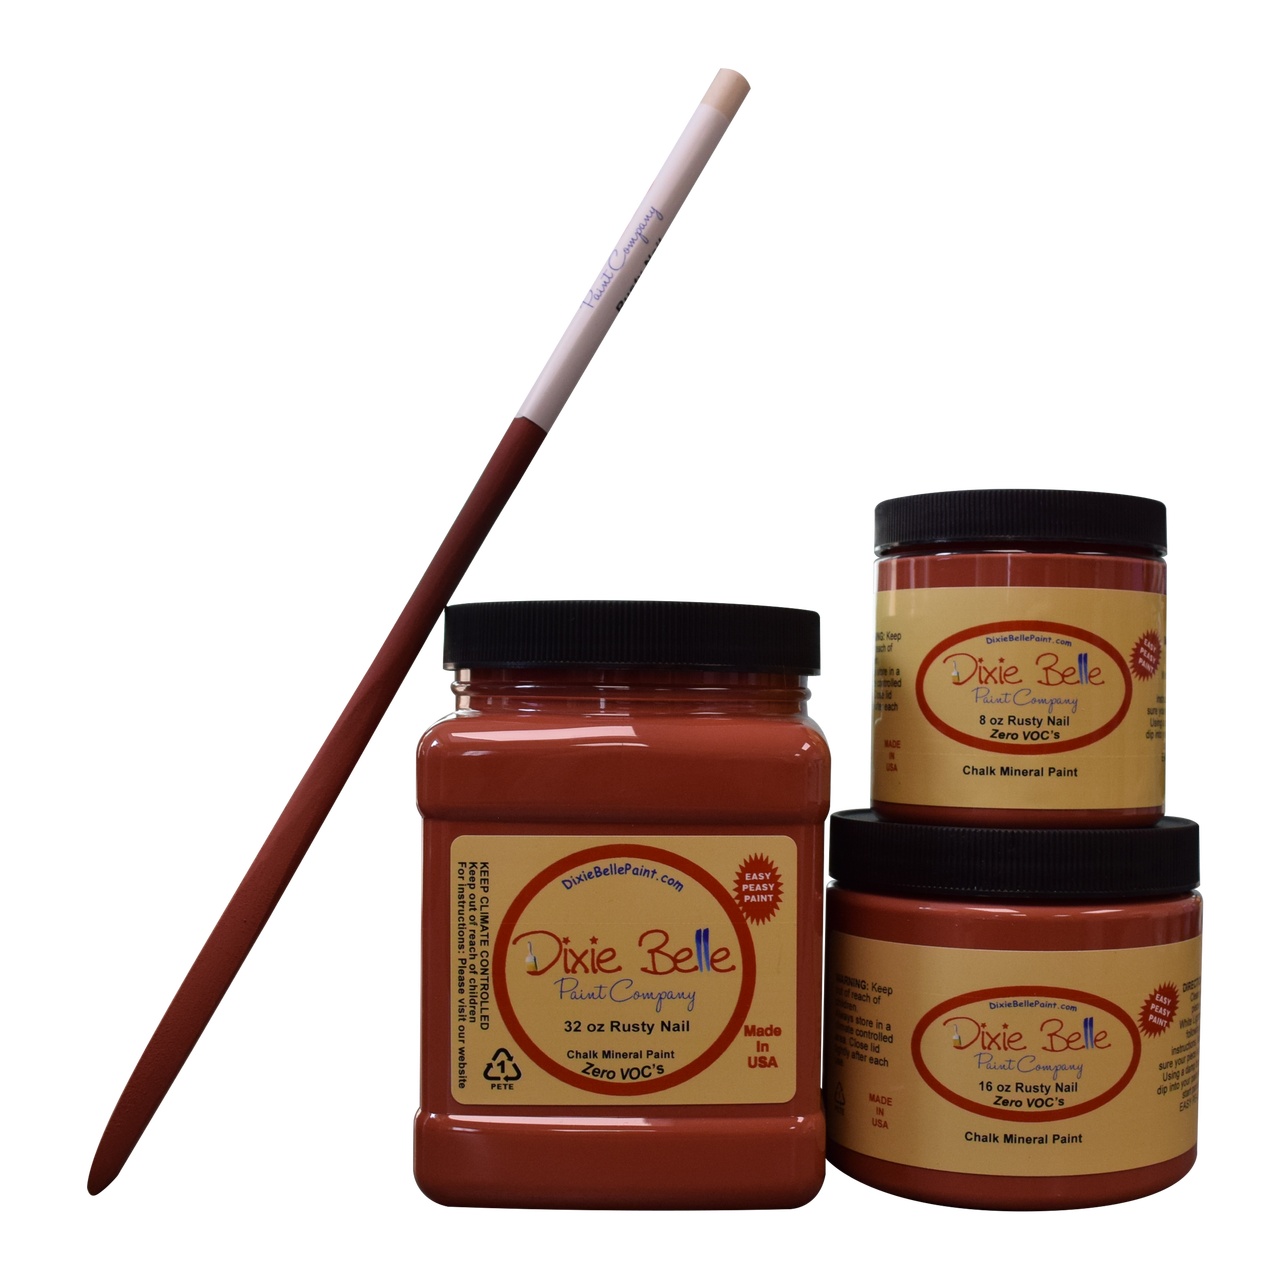 Dixie Belle Chalk Mineral Paint - Rusty Nail